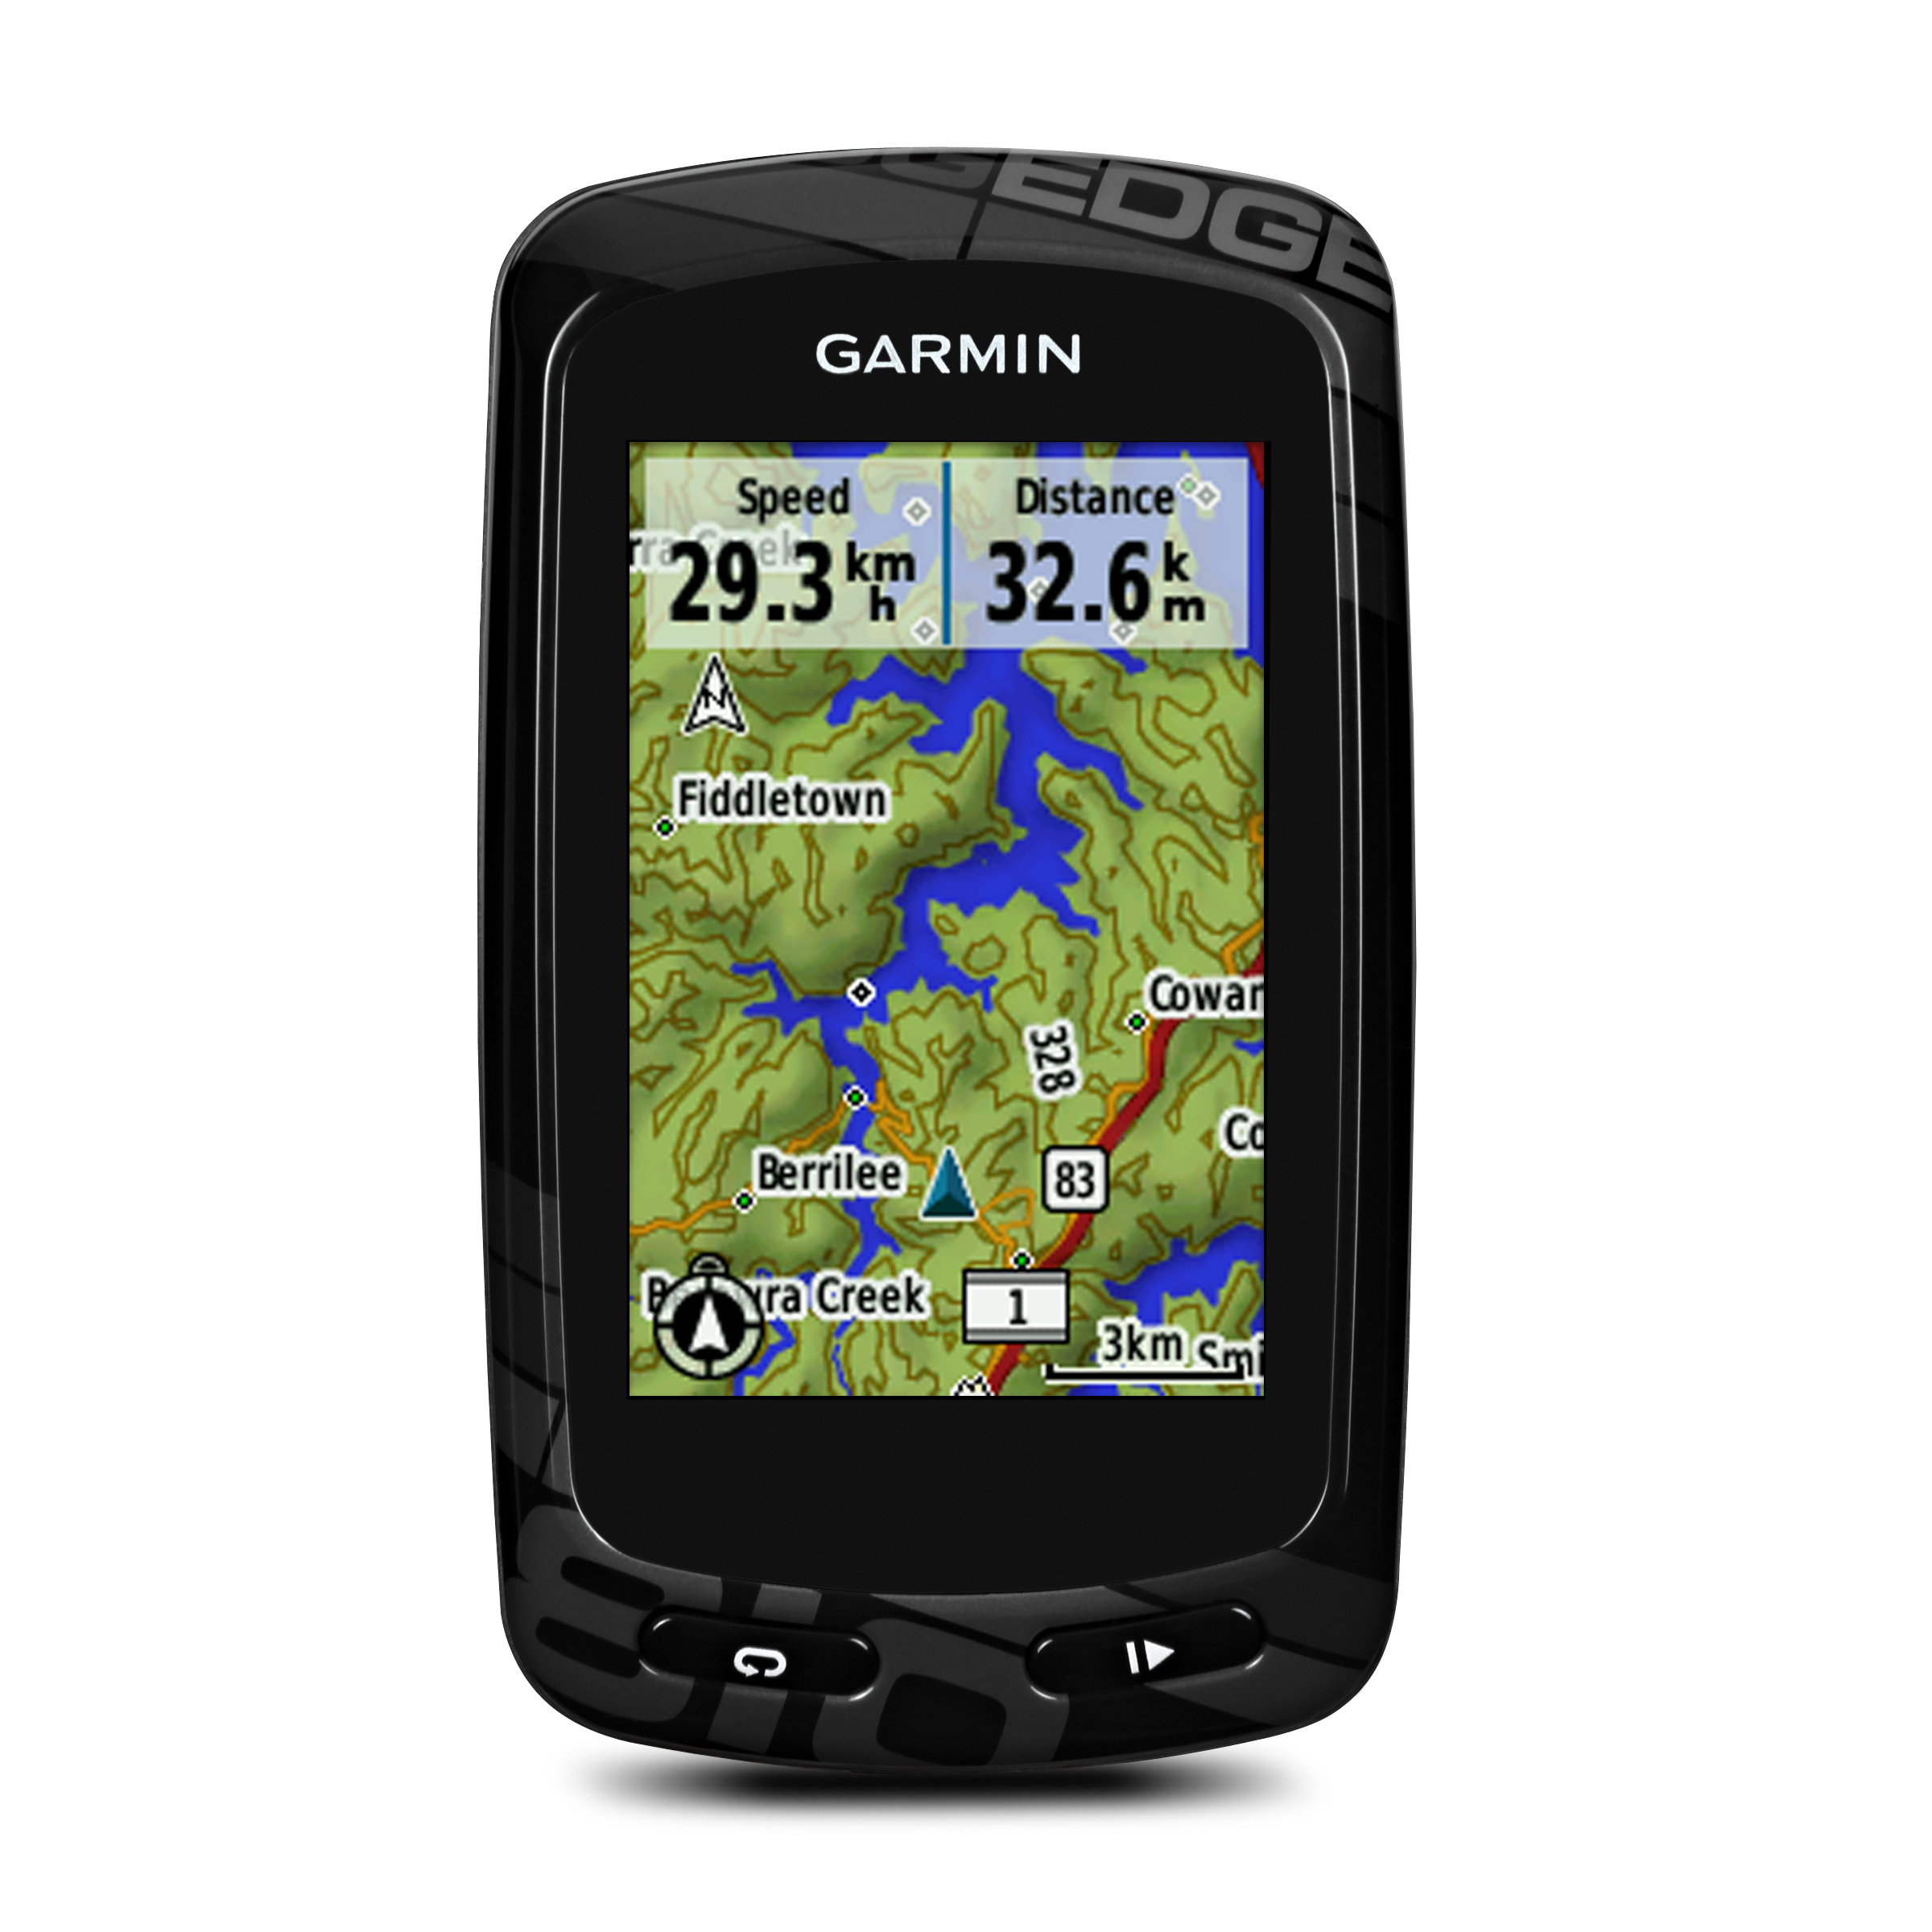 New Garmin Edge 810 Bike Computer Available For Delivery at Heart Rate